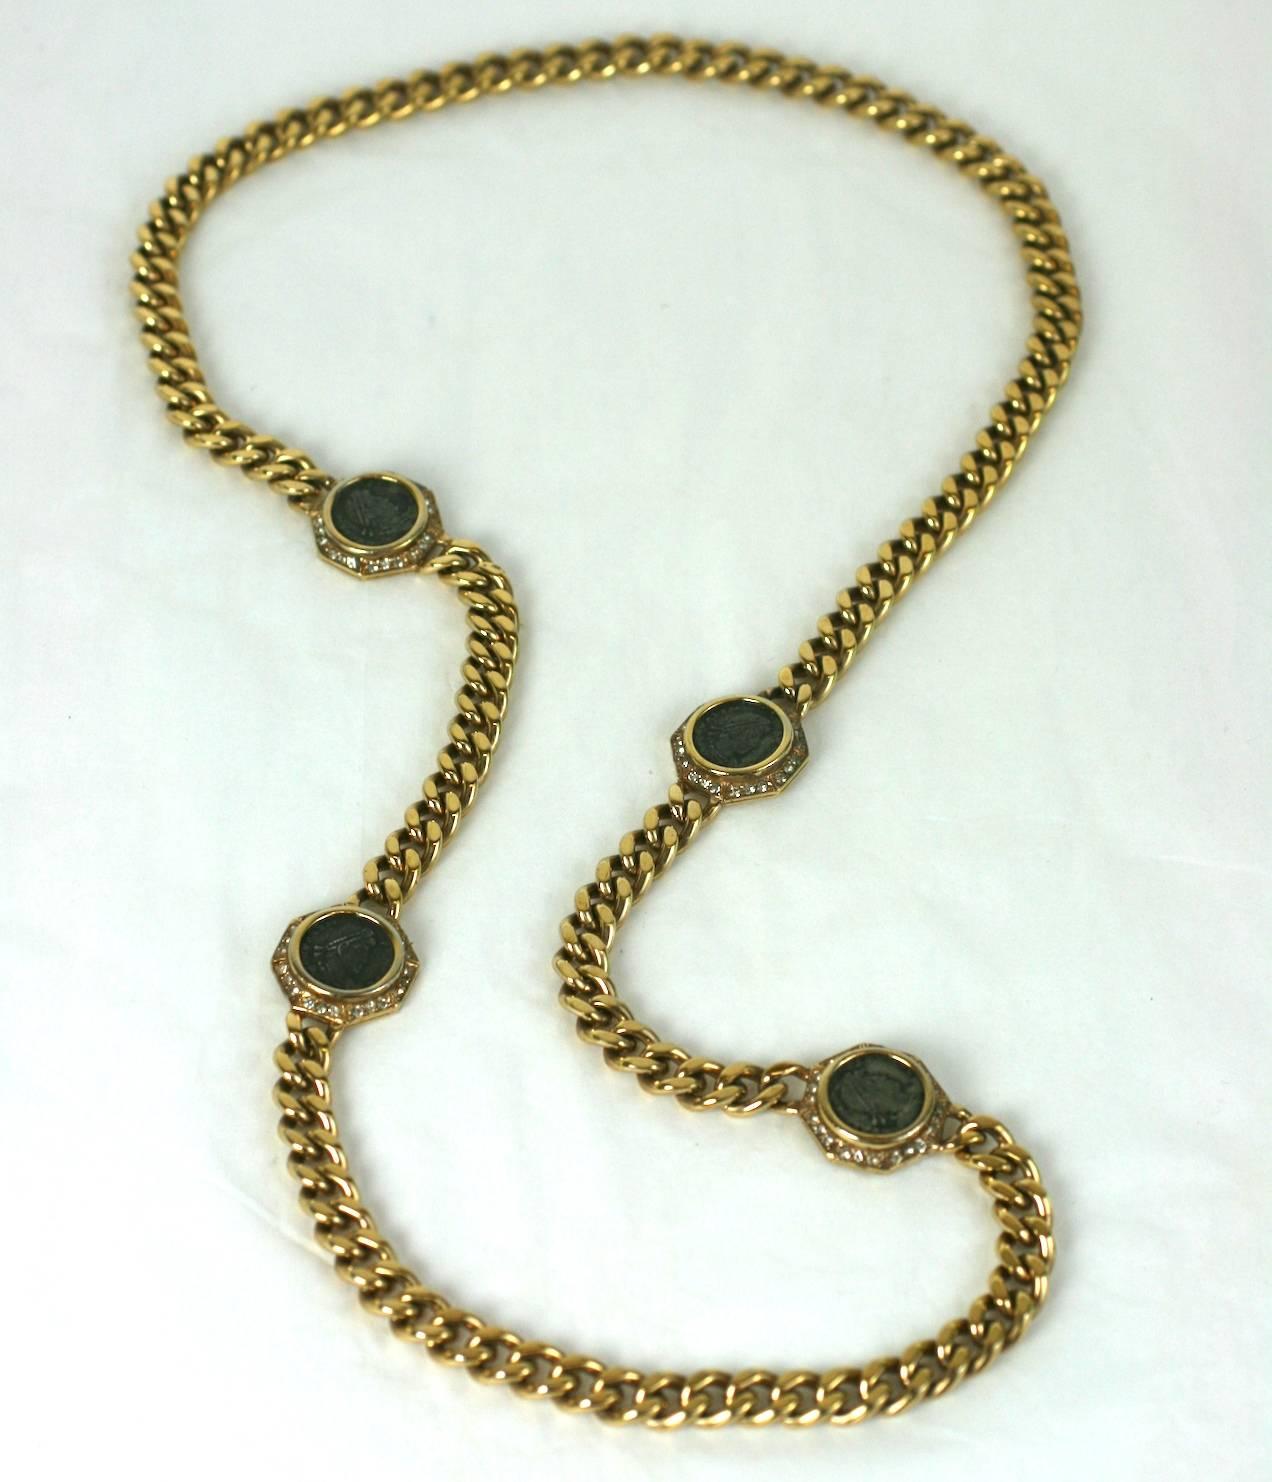 Ciner Ancient Coin Chain Necklace in the Bulgari style. Gilt curb link chain with stations of ancient coins set in pave settings. No Closure. 1980's USA. 34